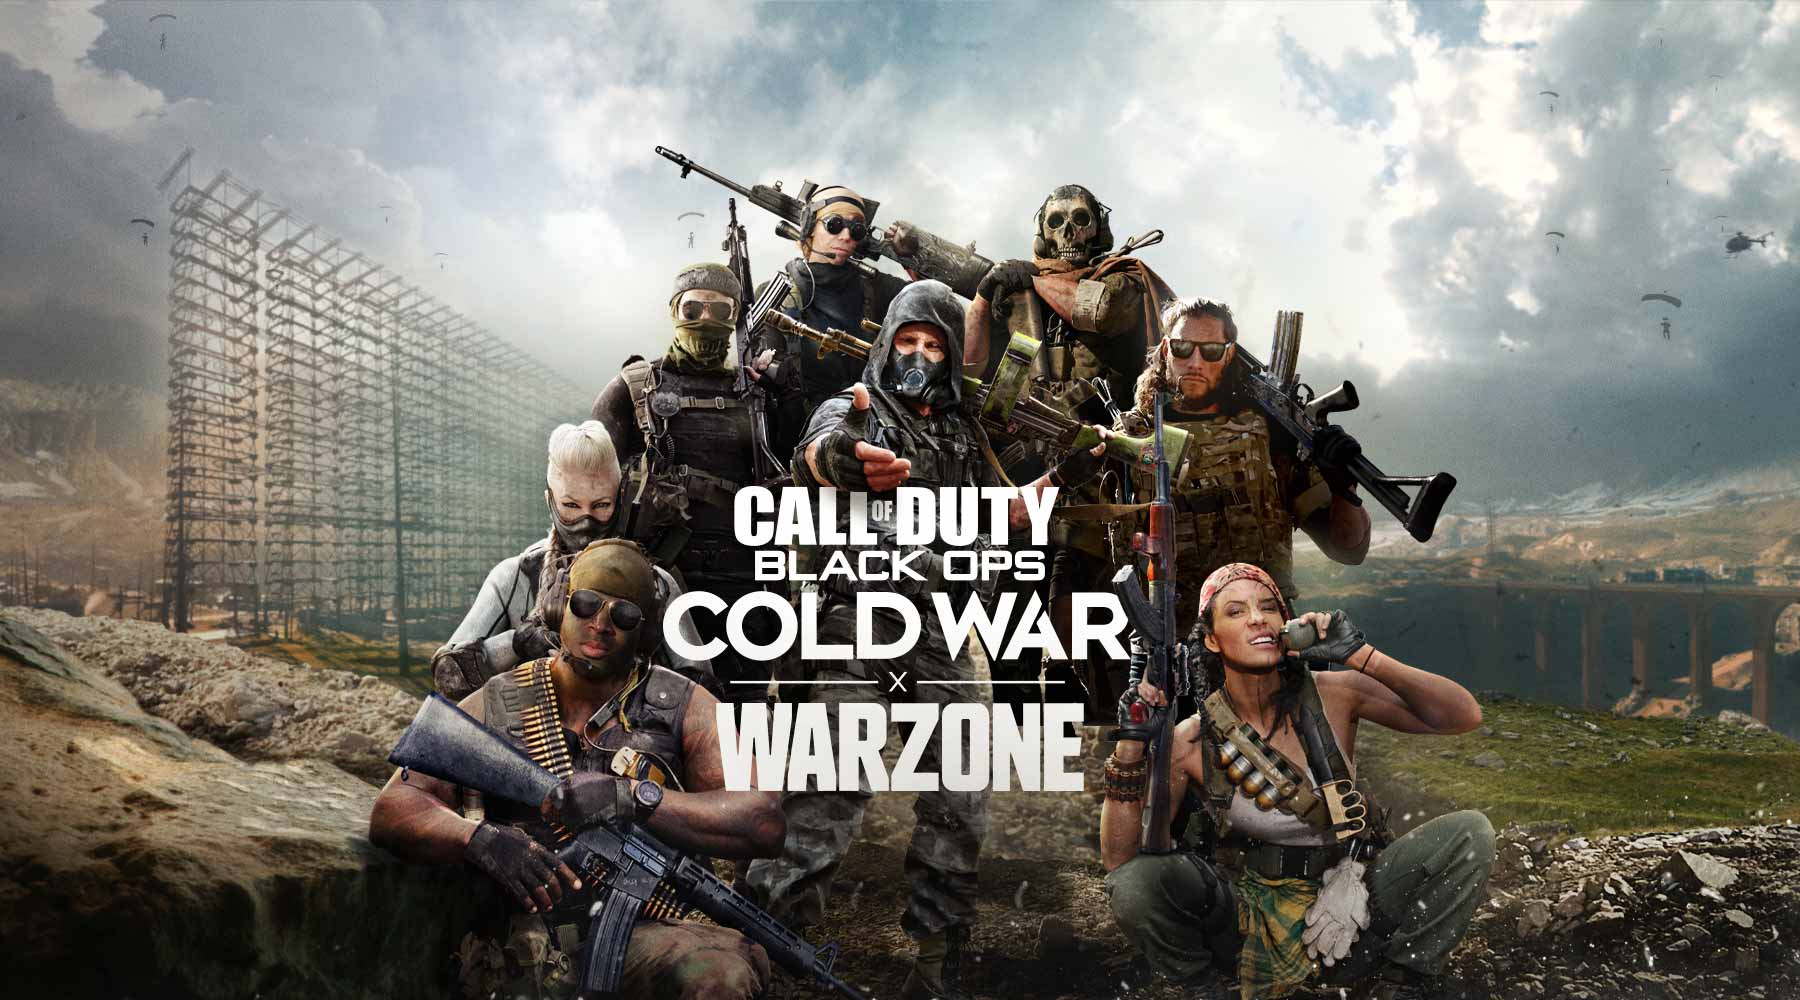 Prime Gaming: Call of Duty: Black Ops Cold War x Warzone In-Game Loot /Content